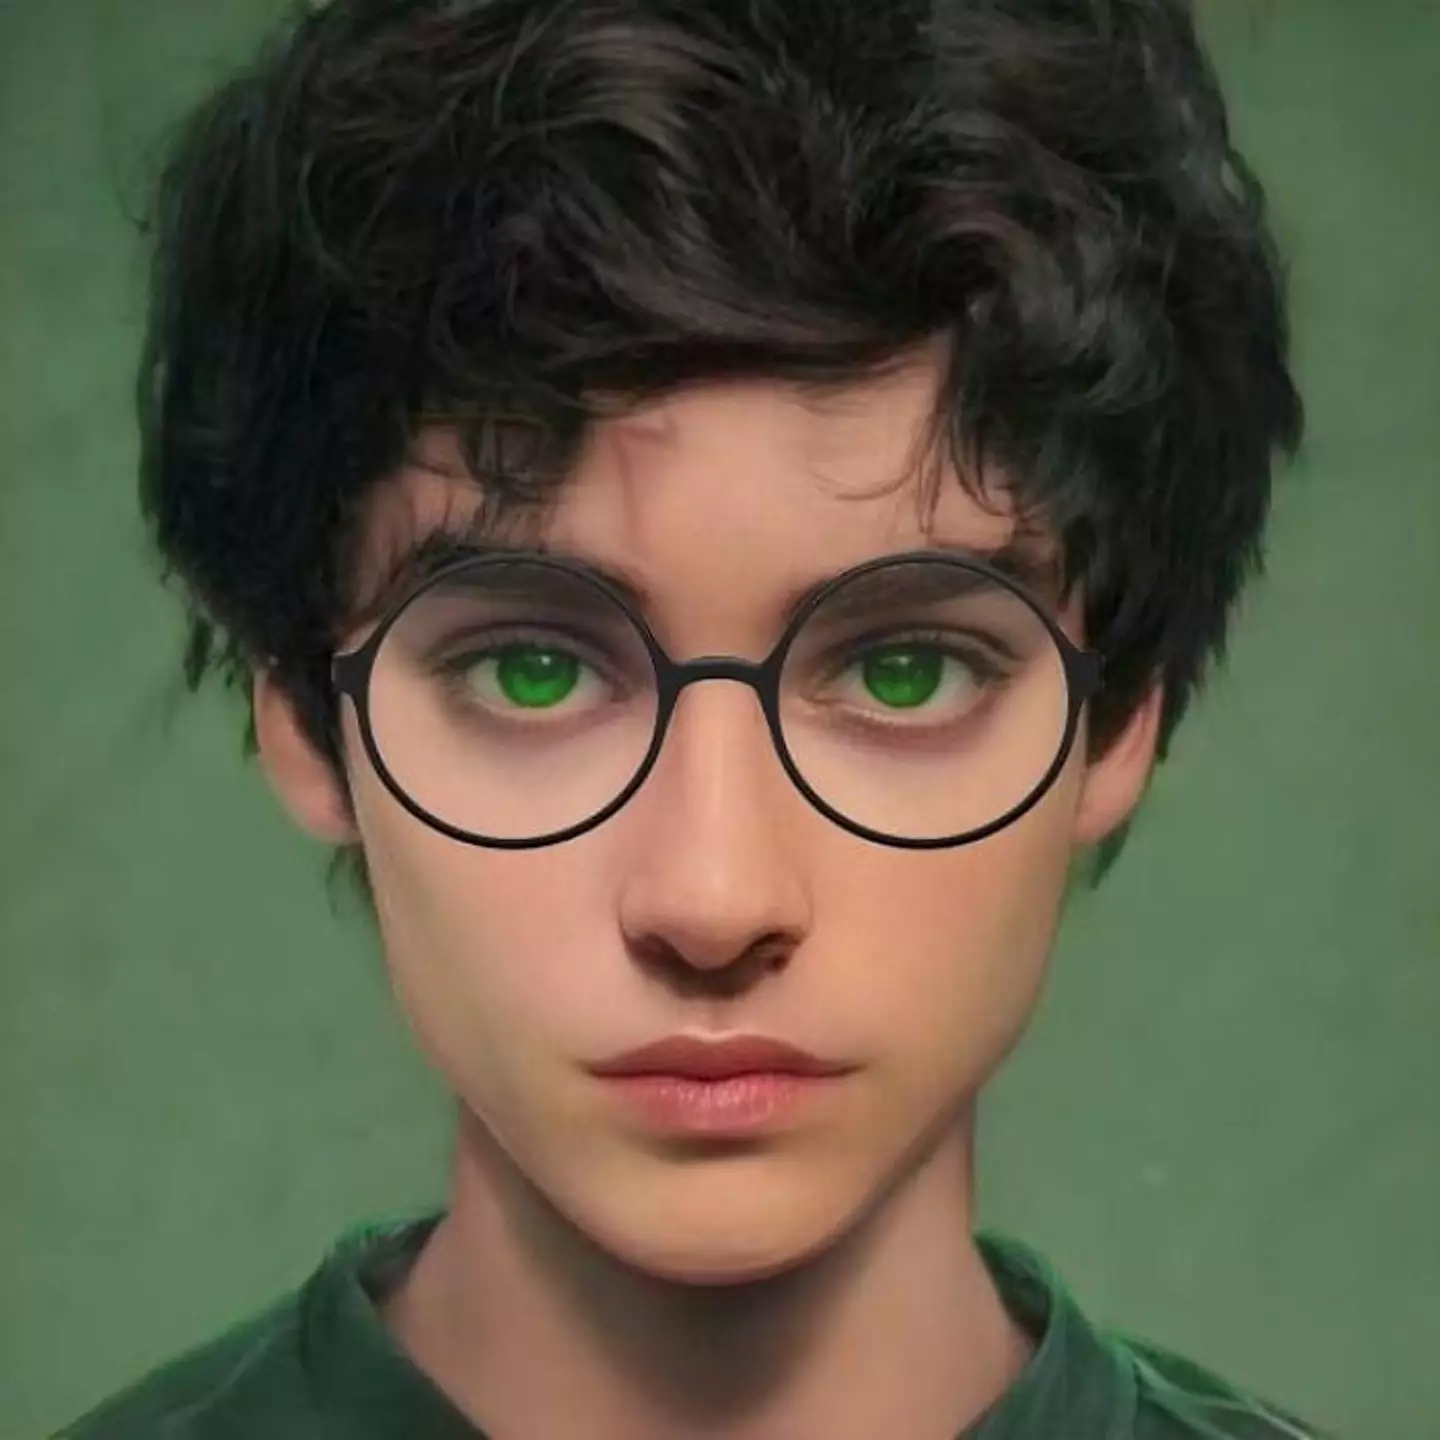 The new AI images showcase the Wizarding World.